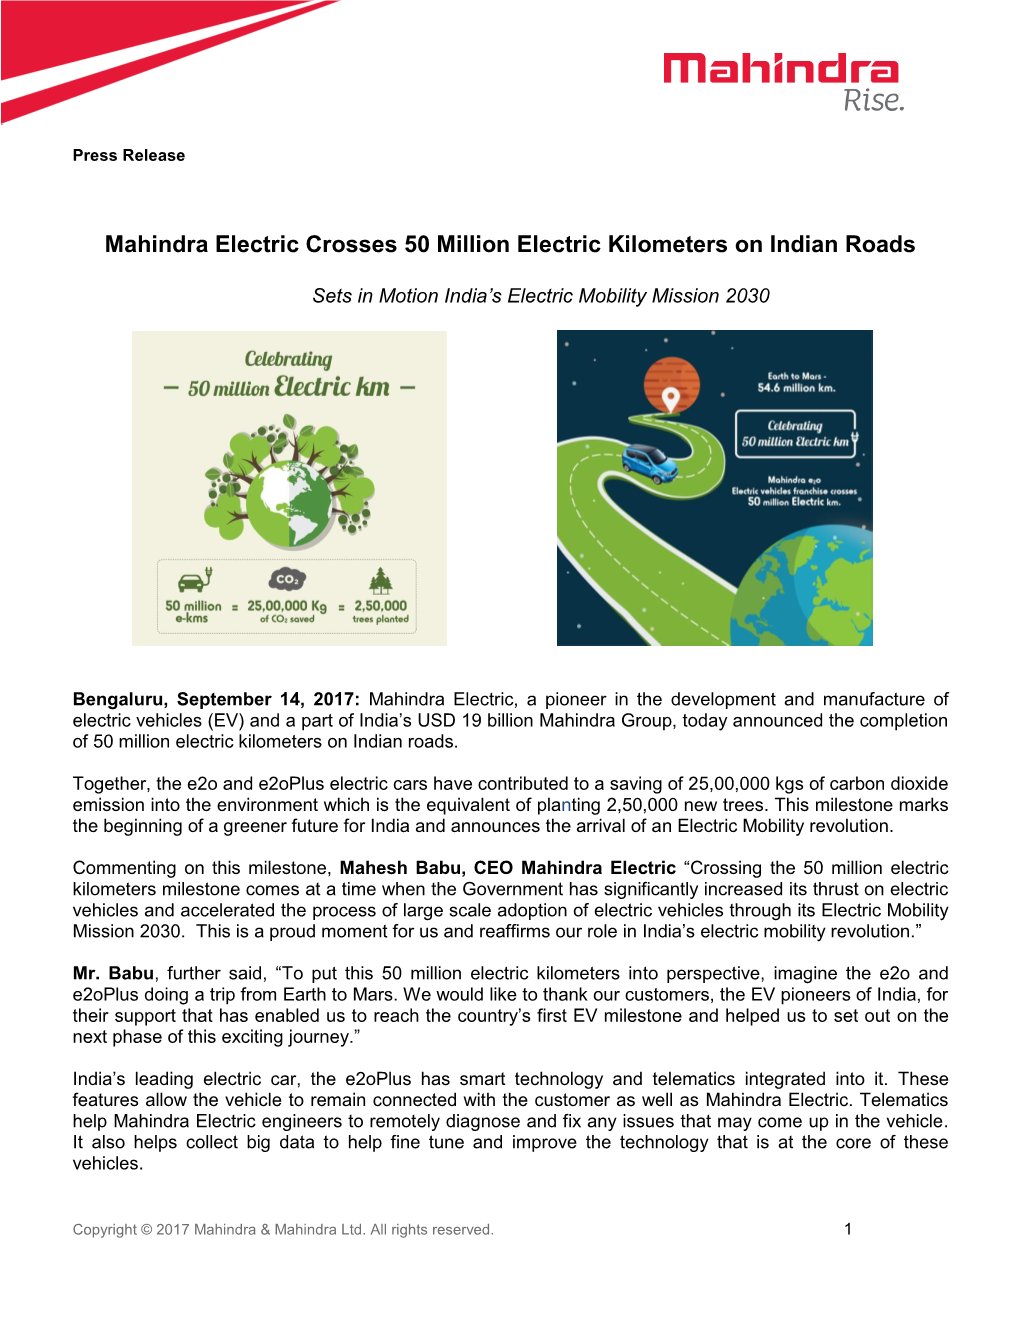 Mahindra Group, Today Announced the Completion of 50 Million Electric Kilometers on Indian Roads